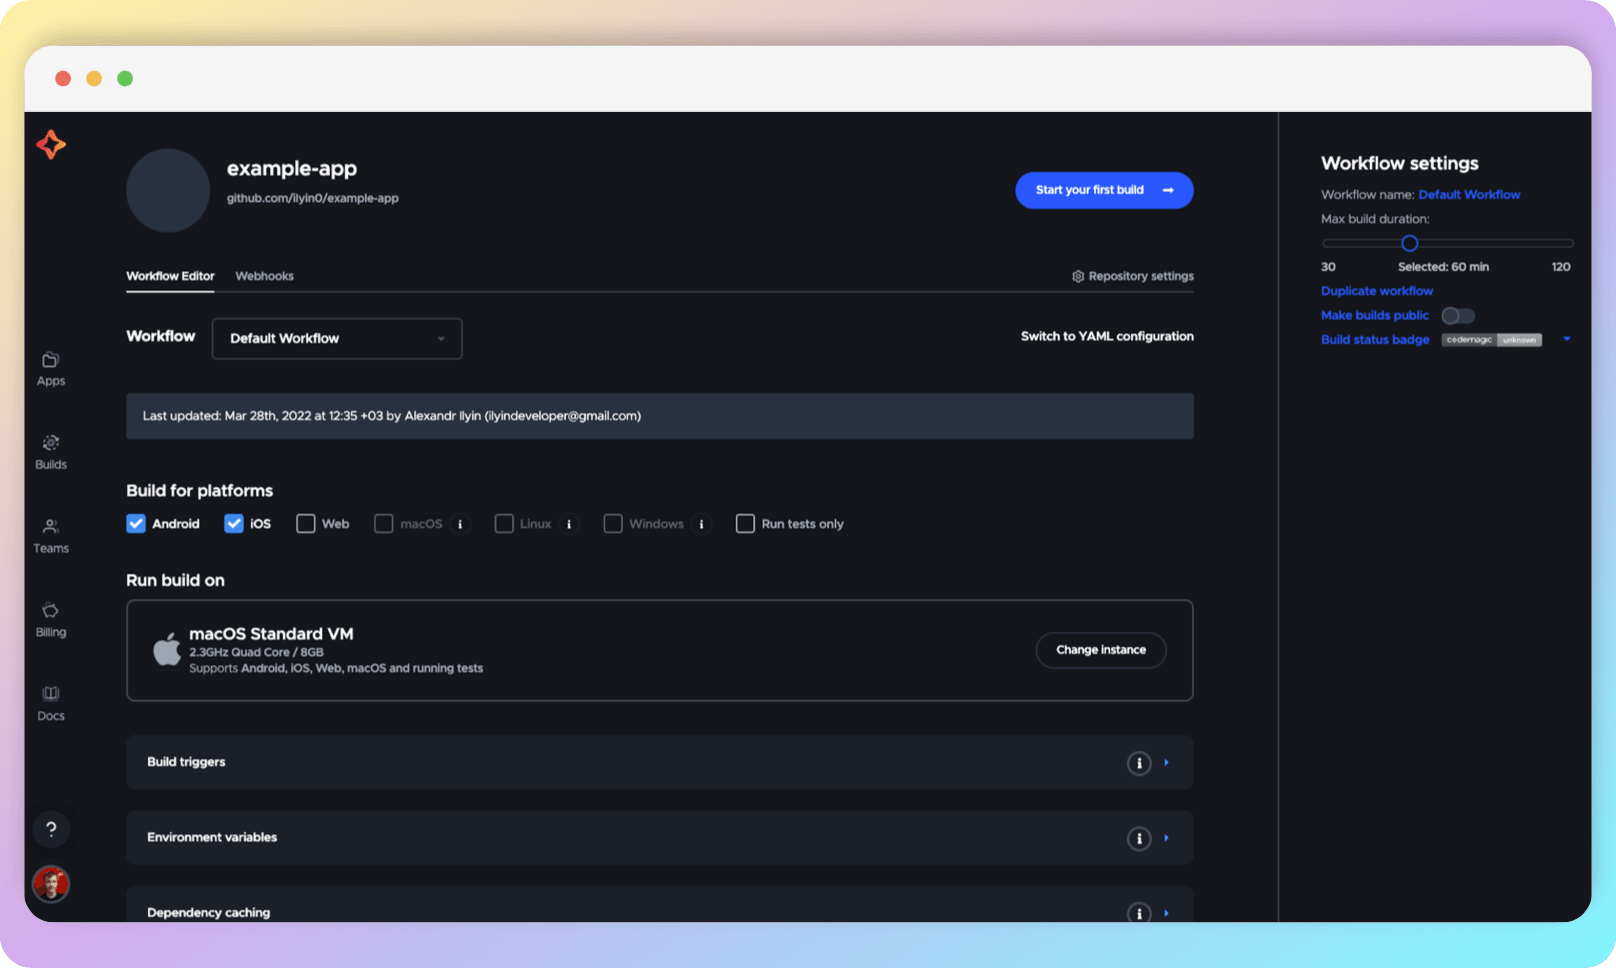 Workflow Editor page